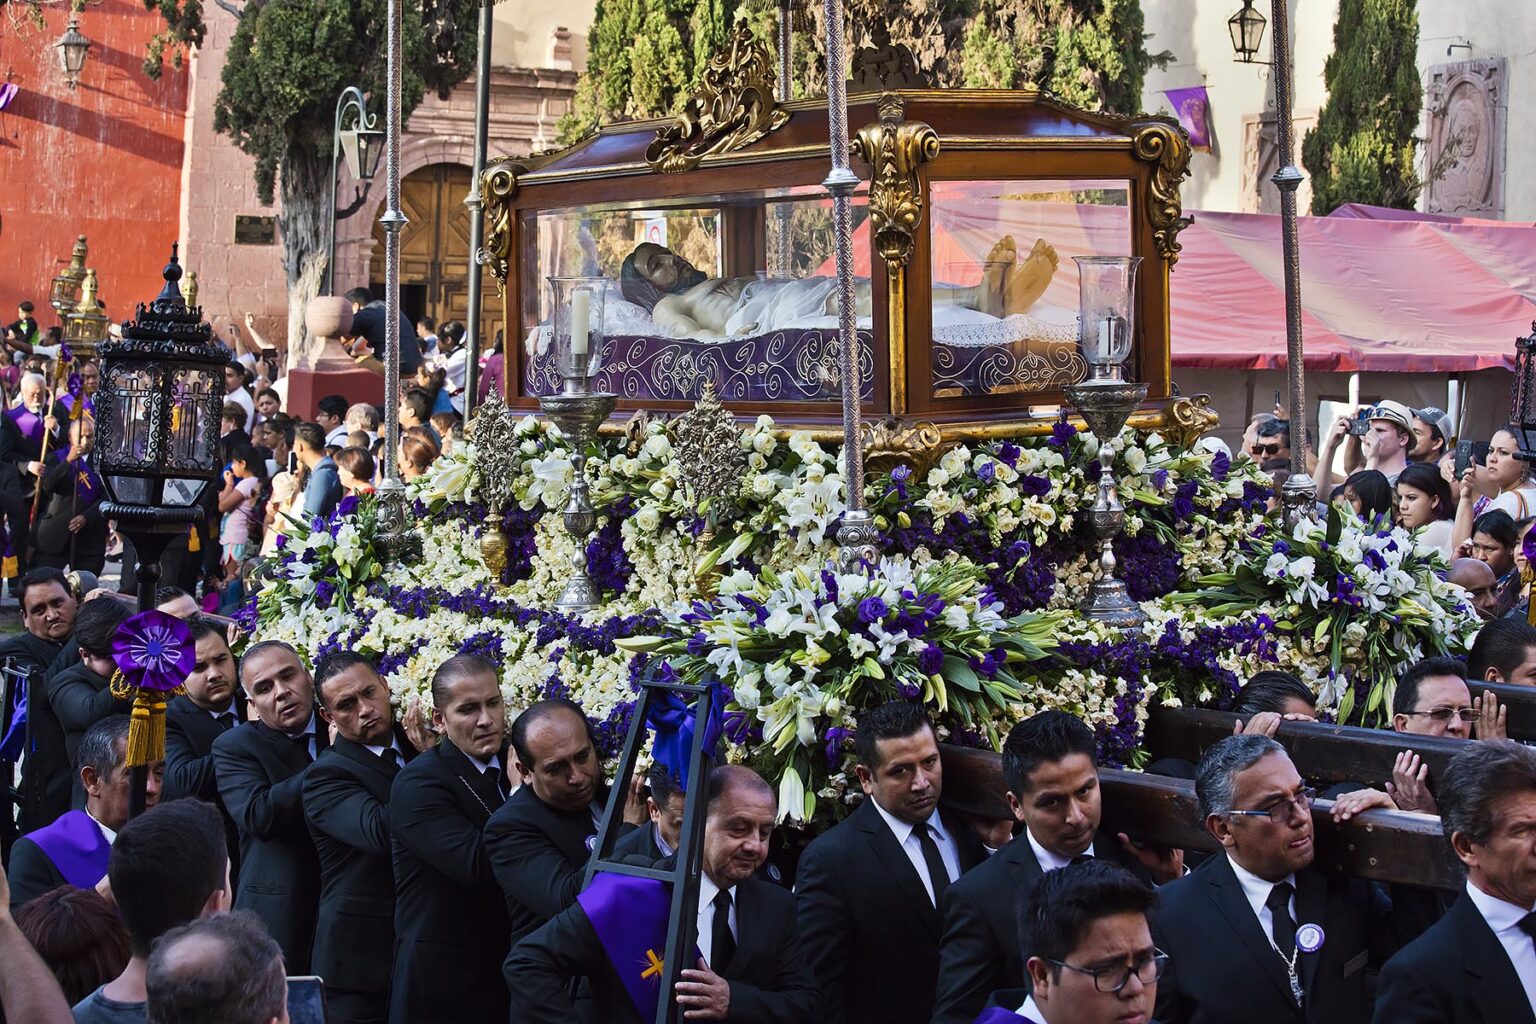 Mexican men carry a statue of JESUS IN A COFFIN in the Good Friday Procession, known as the Santo Entierro, from the ORATORIO CHURCH - SAN MIGUEL DE ALLENDE, MEXICO